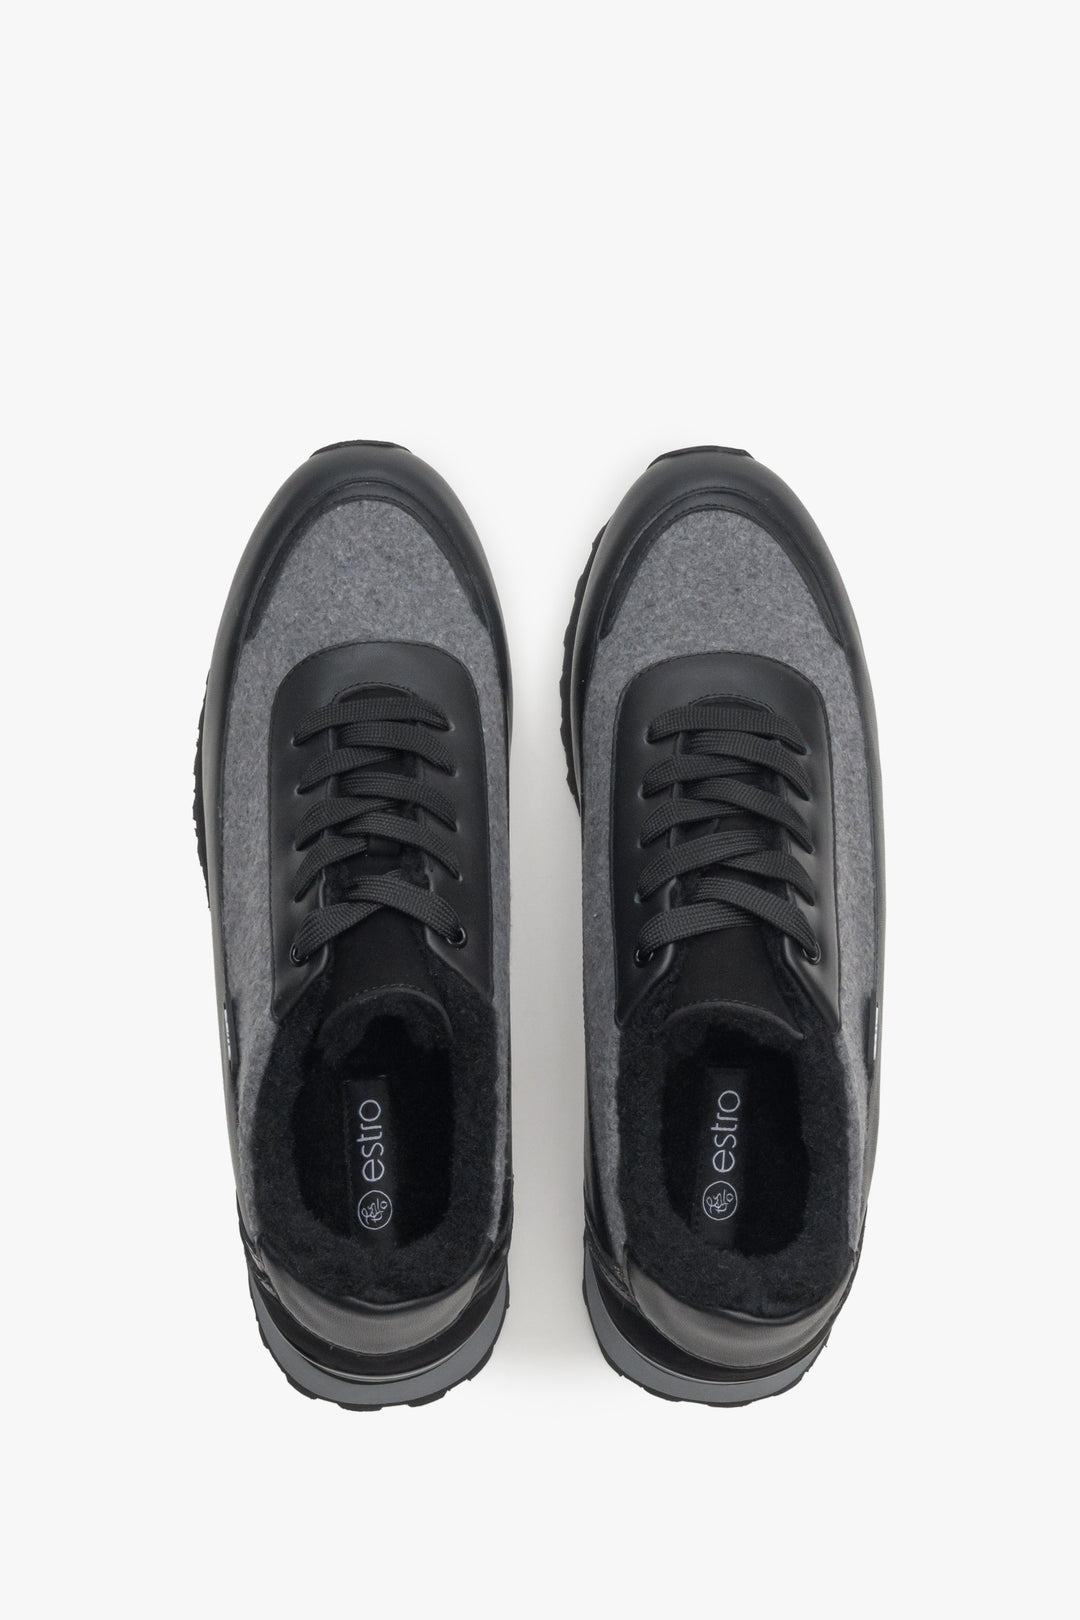 Women's black and grey leather-textile sneakers with insulation by Estro - top view presentation of the model.